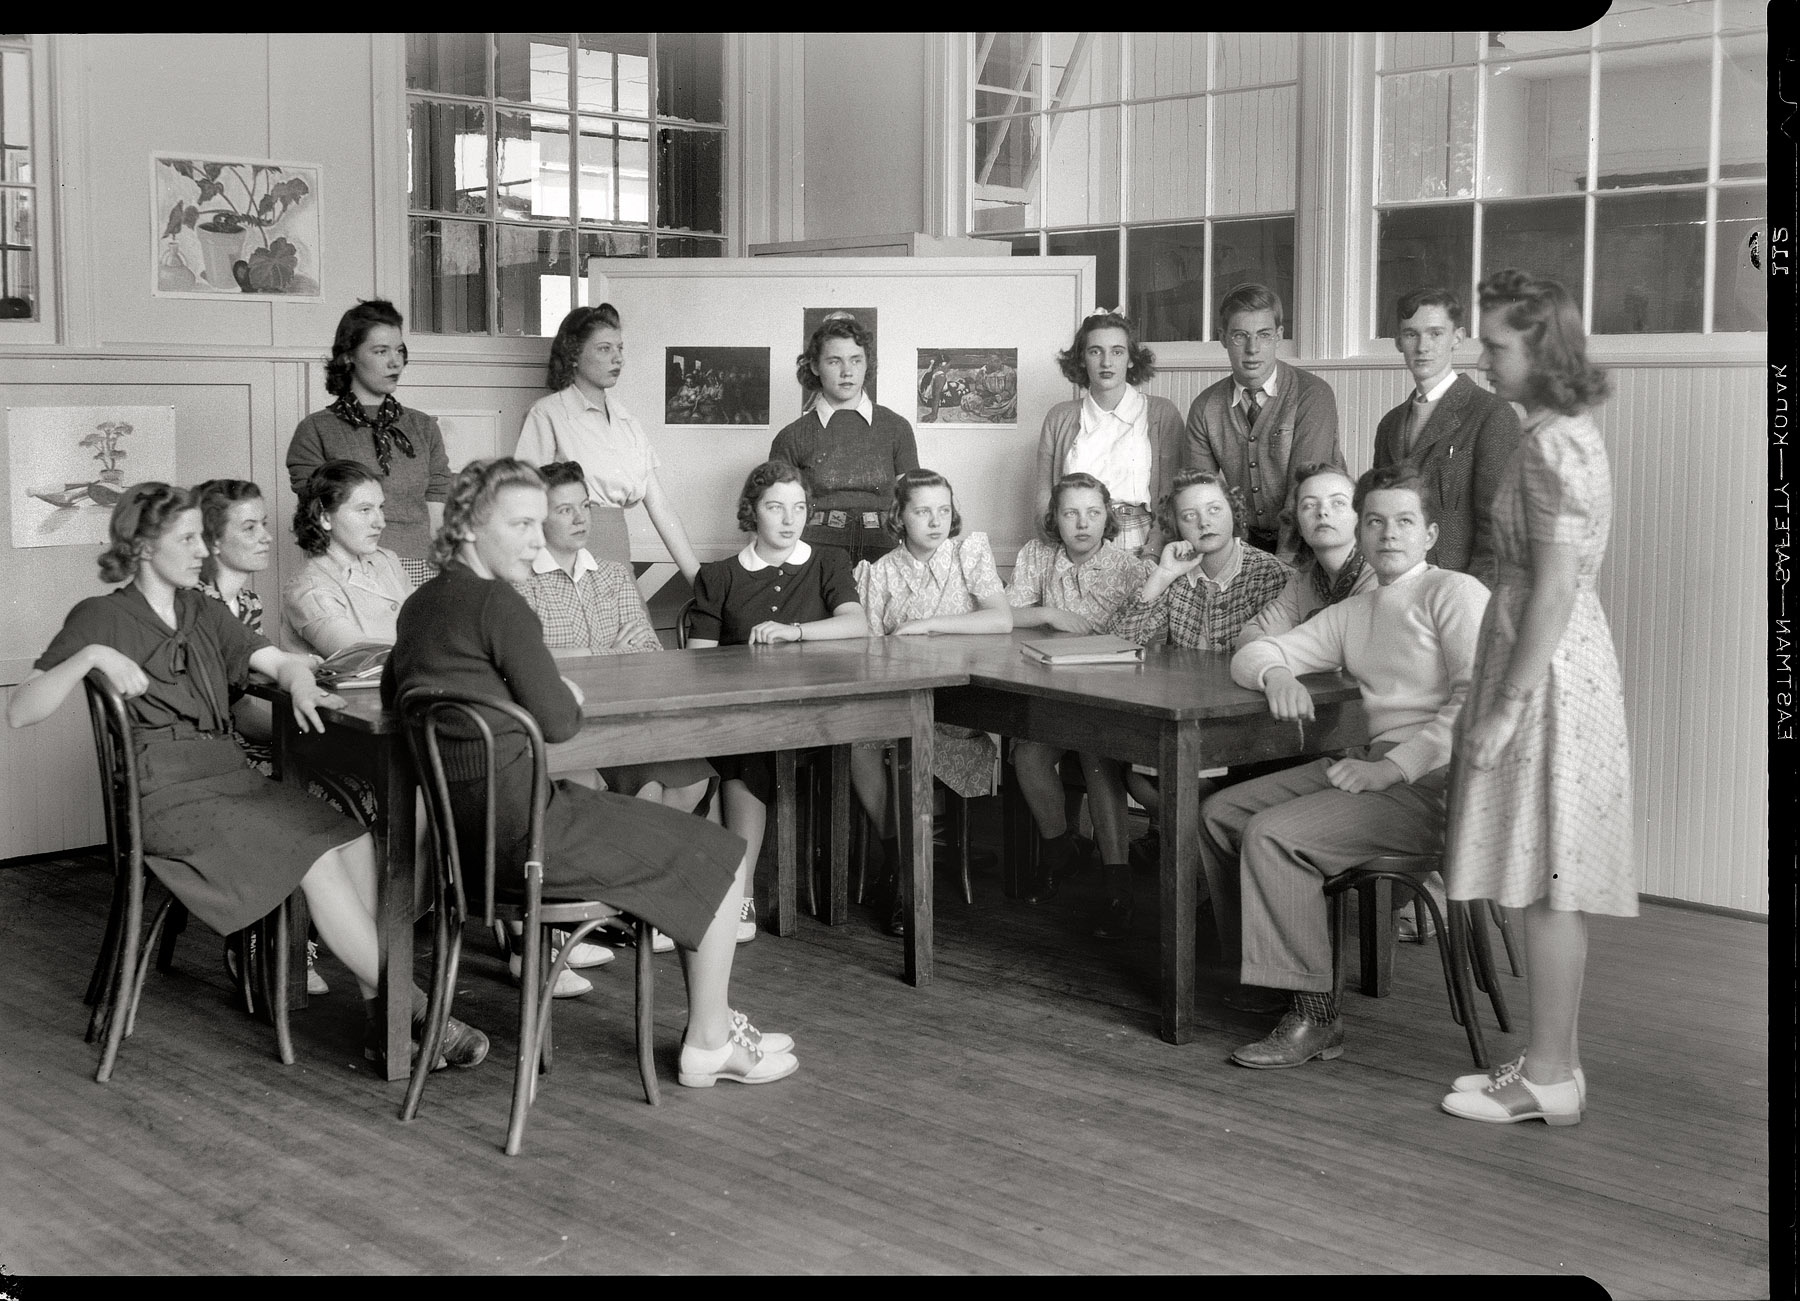 Art class circa 1940. "Montgomery High School students, Maryland." Our third or fourth photo from Montgomery High. Anyone have an old yearbook from there? National Photo Company Collection safety negative. View full size.